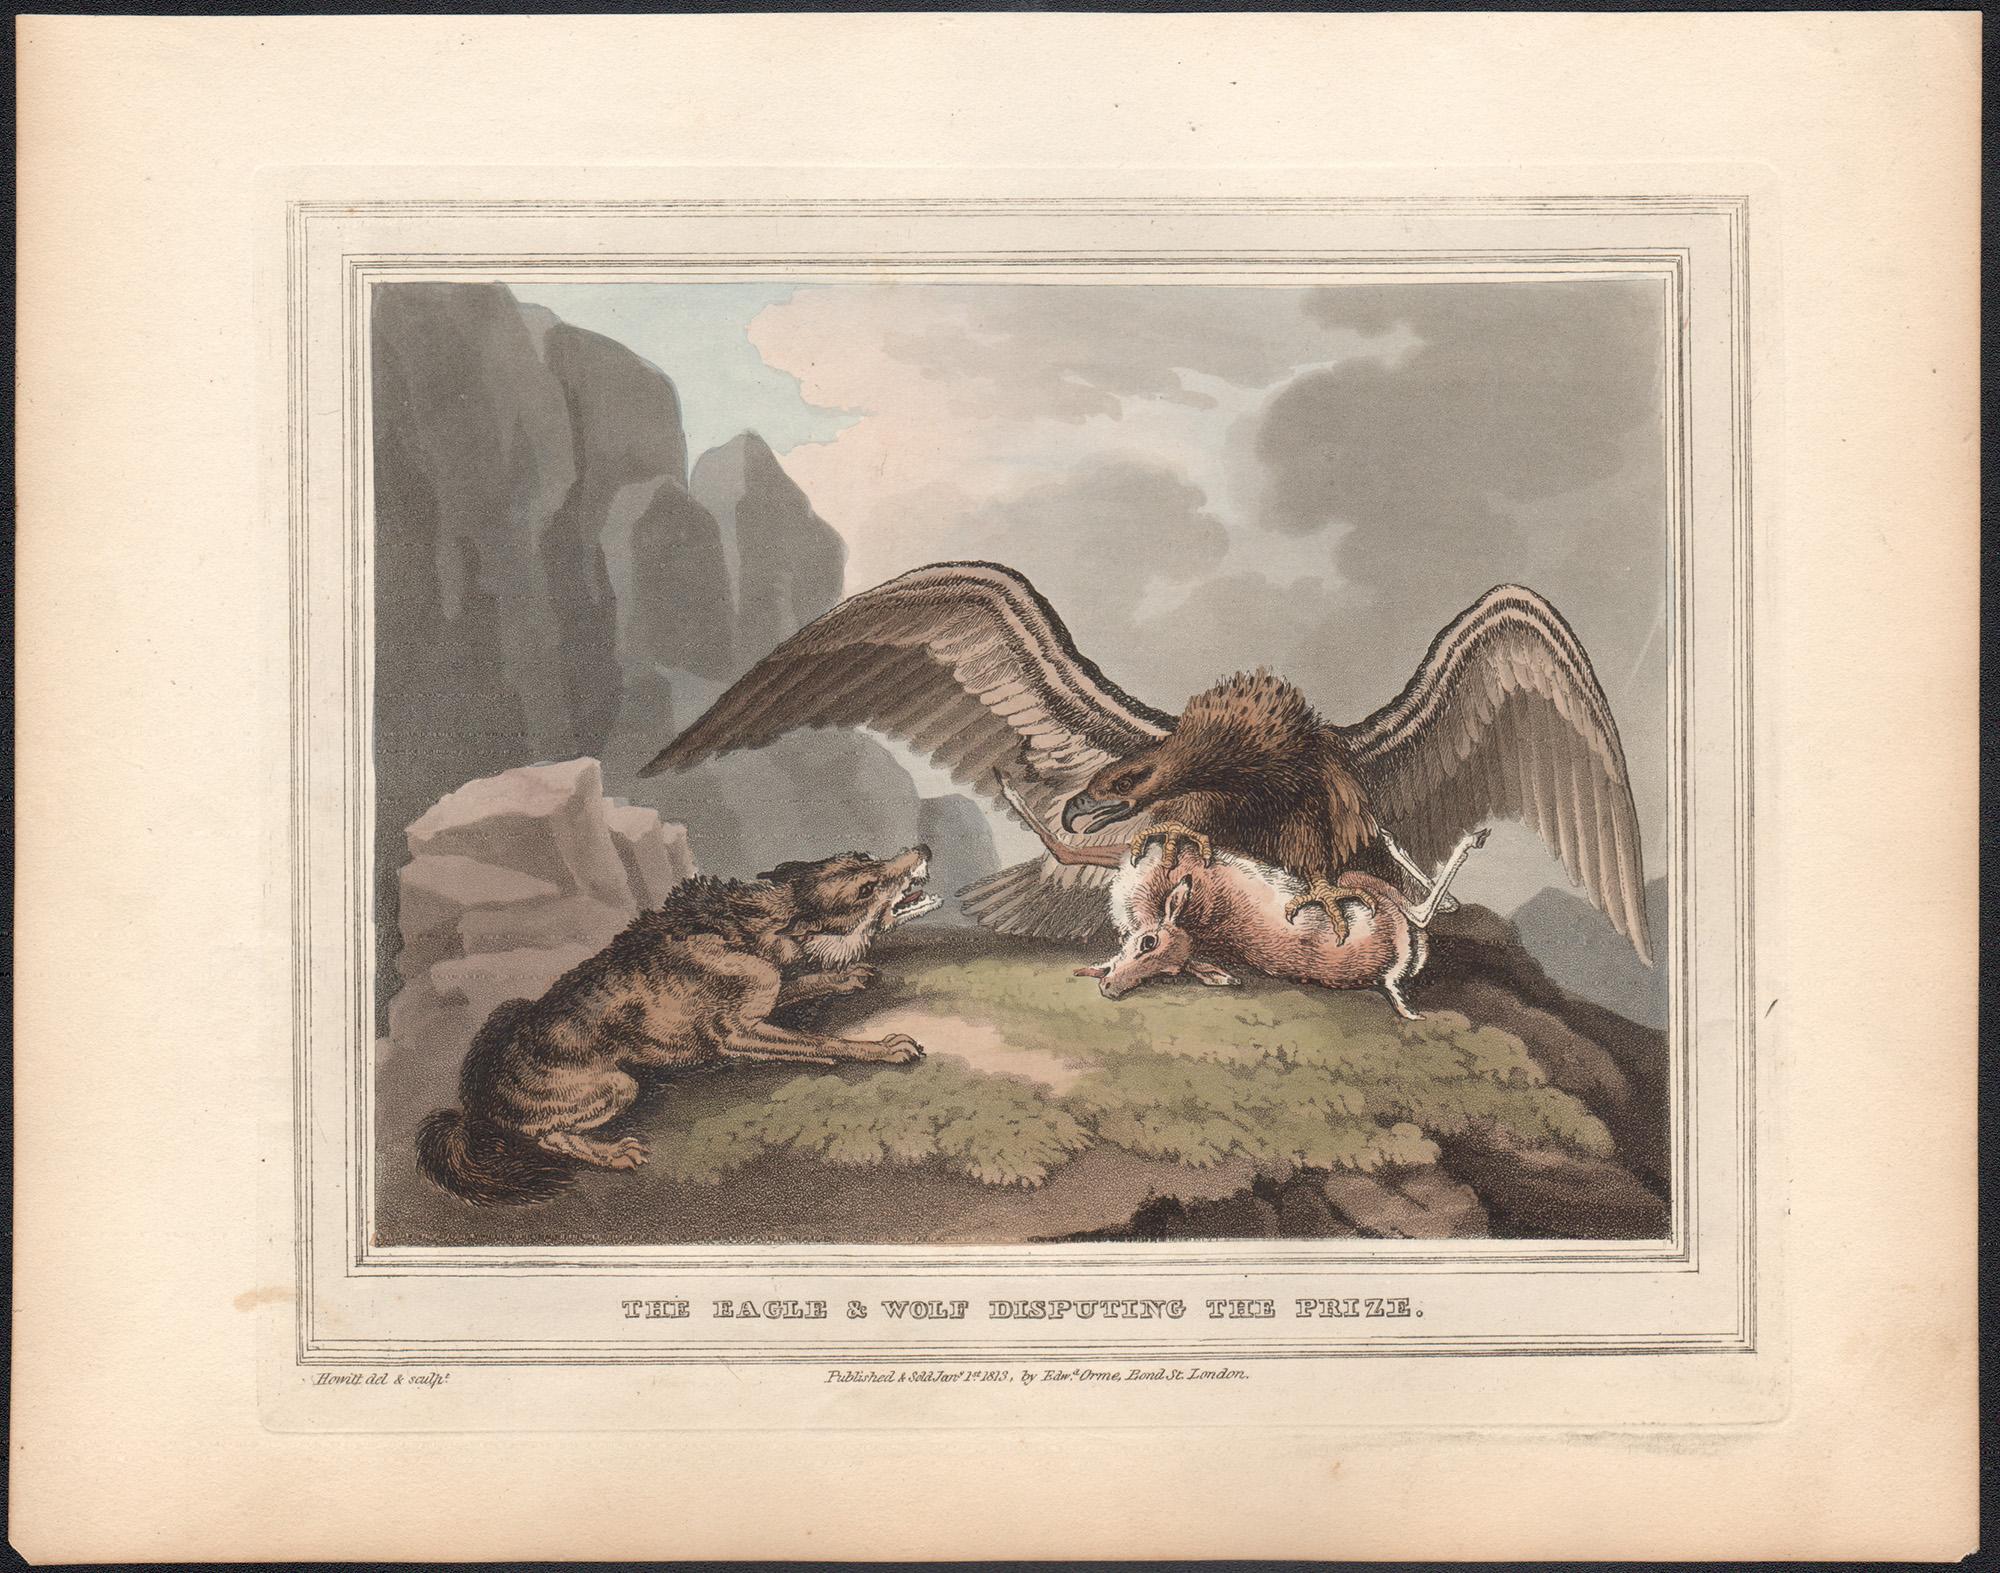 The Eagle & Wolf Disputing the Prize, aquatint engraving hunting print, 1813 - Print by Samuel Howitt